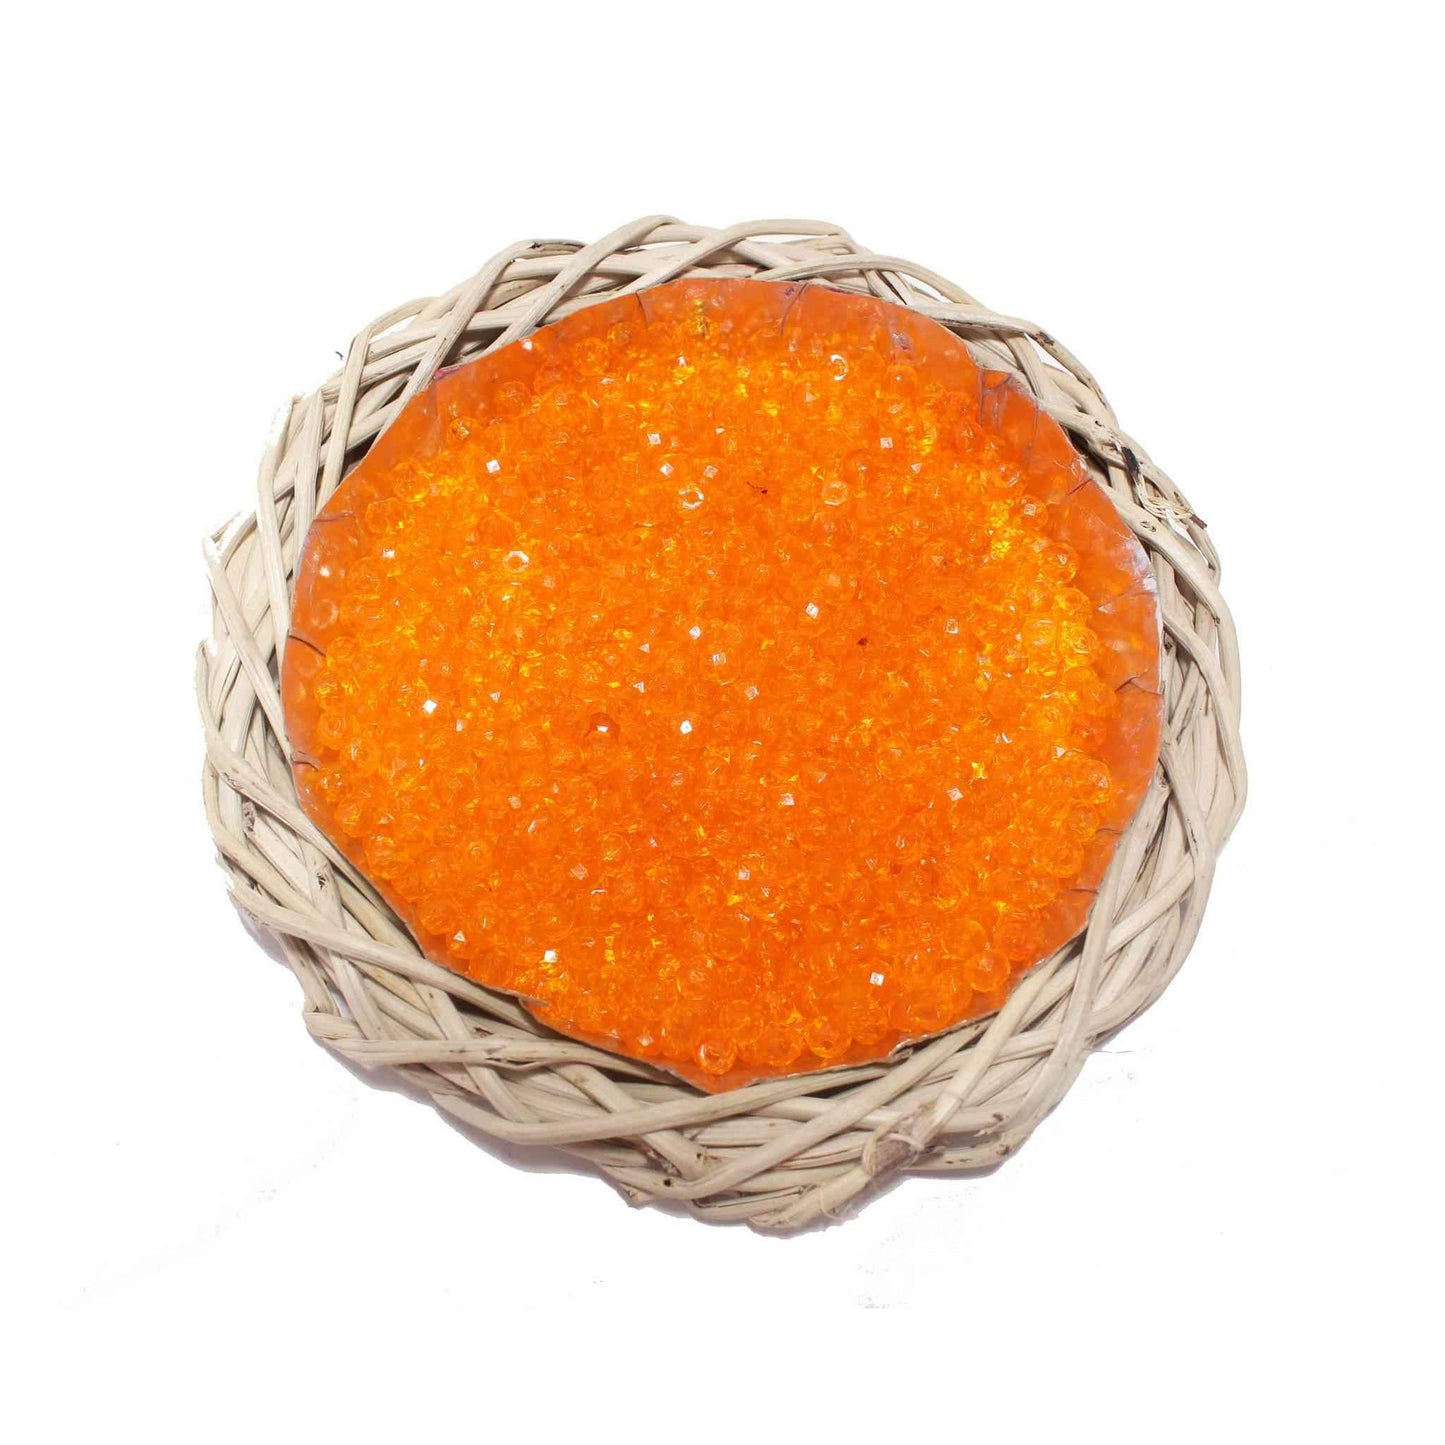 Indian Petals Premium quality small Glass Beads for DIY Craft, Trousseau Packing or Decoration - Design 721, Orange - Indian Petals